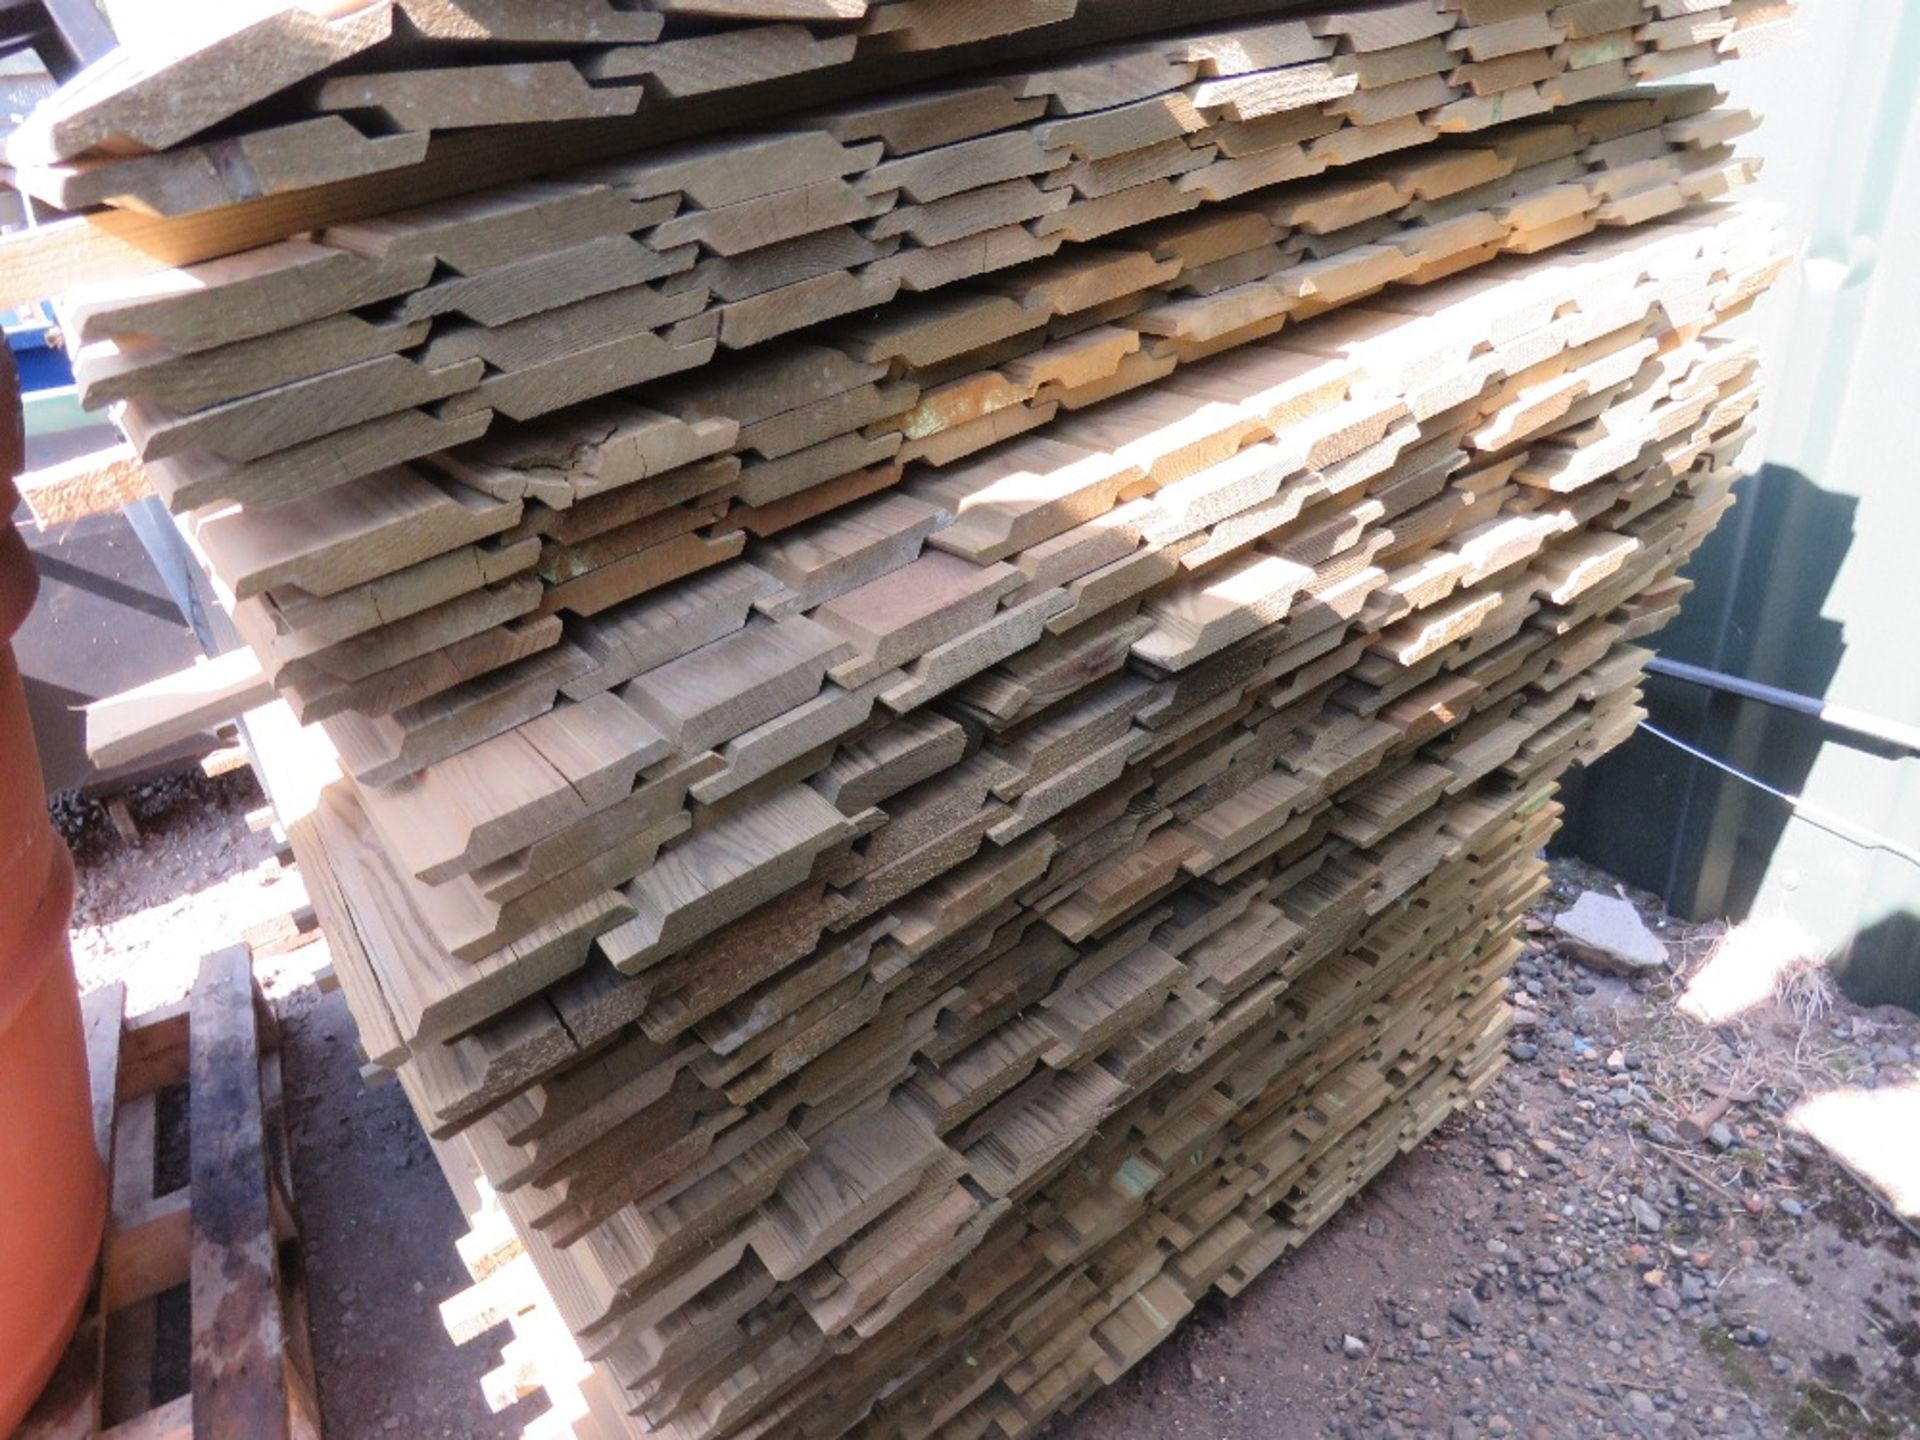 PACK OF PRESSURE TREATED SHIPLAP TIMBER FENCE CLADDING BOARDS, 1.73M LENGTH X 9.5CM WIDTH APPROX. - Image 2 of 3